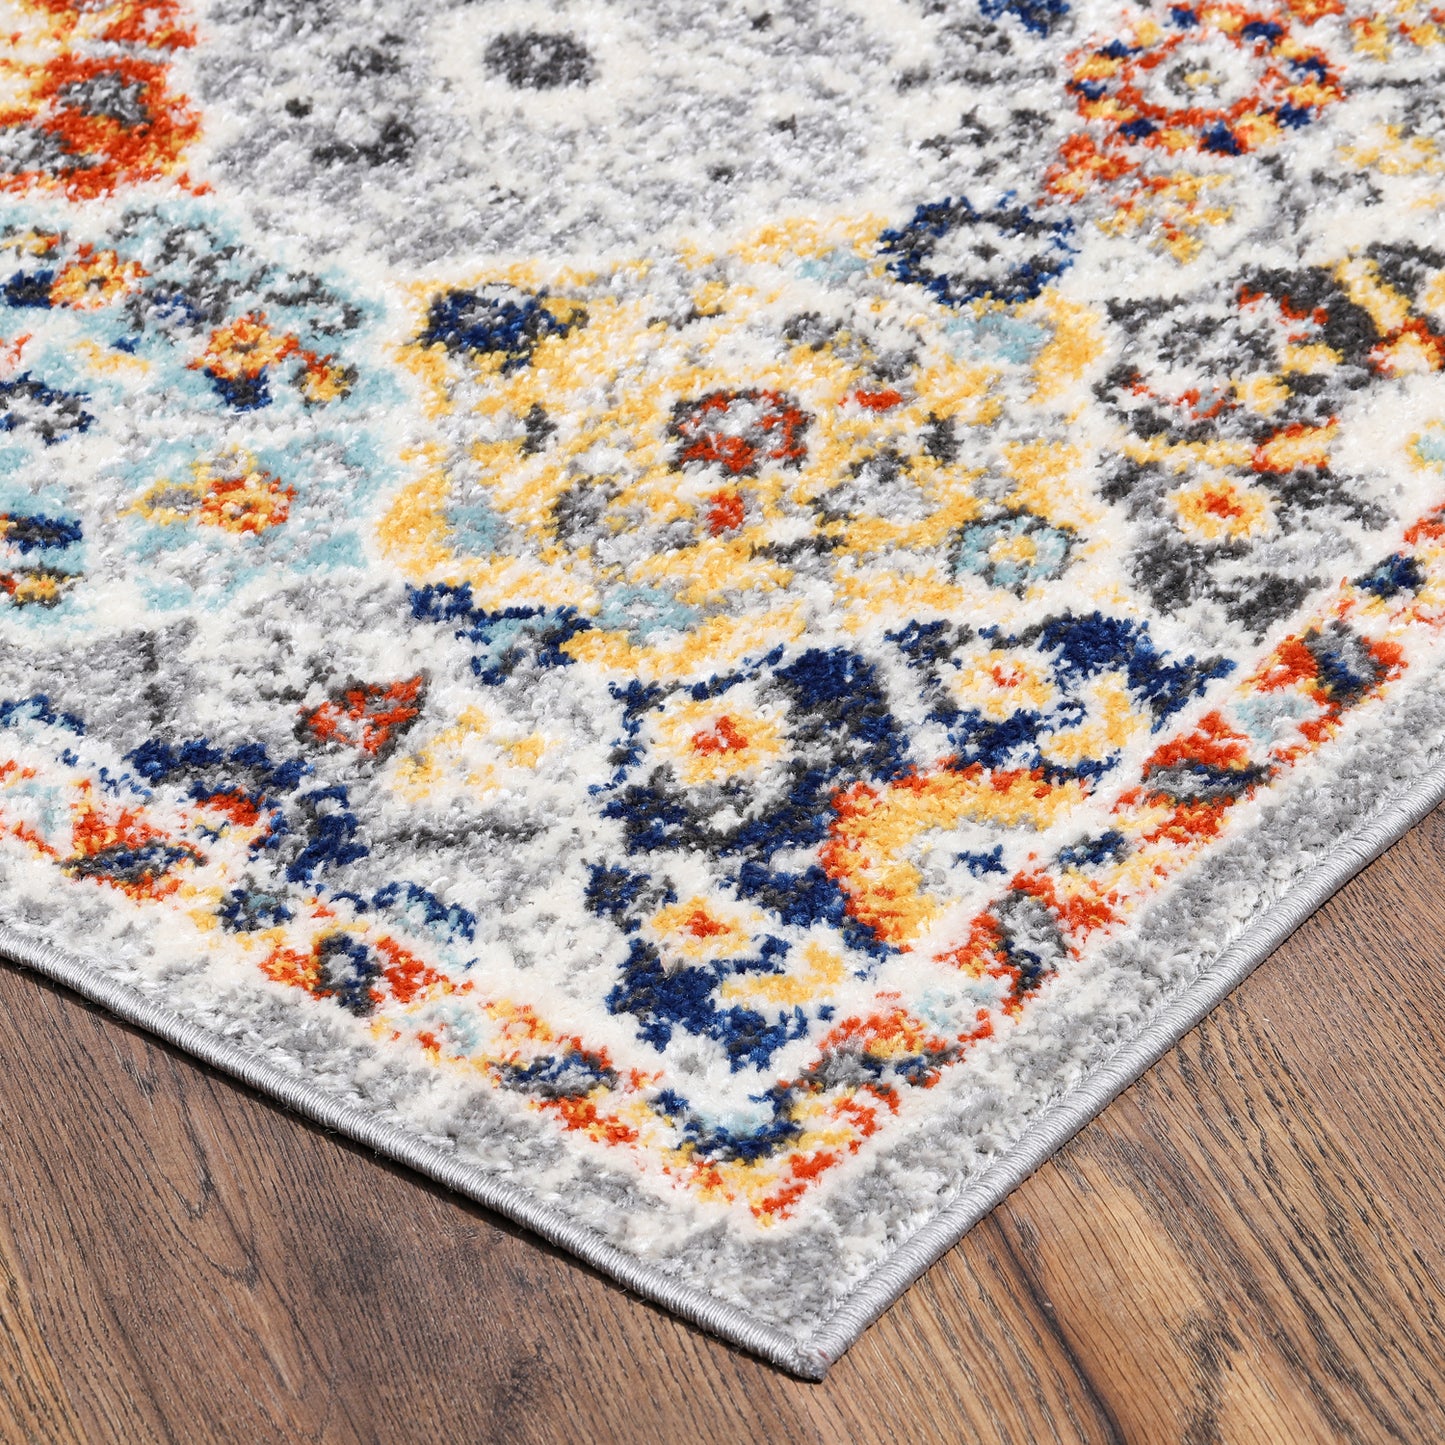 EVIVA Blossom White and Light Gray Area Rug in 9X12